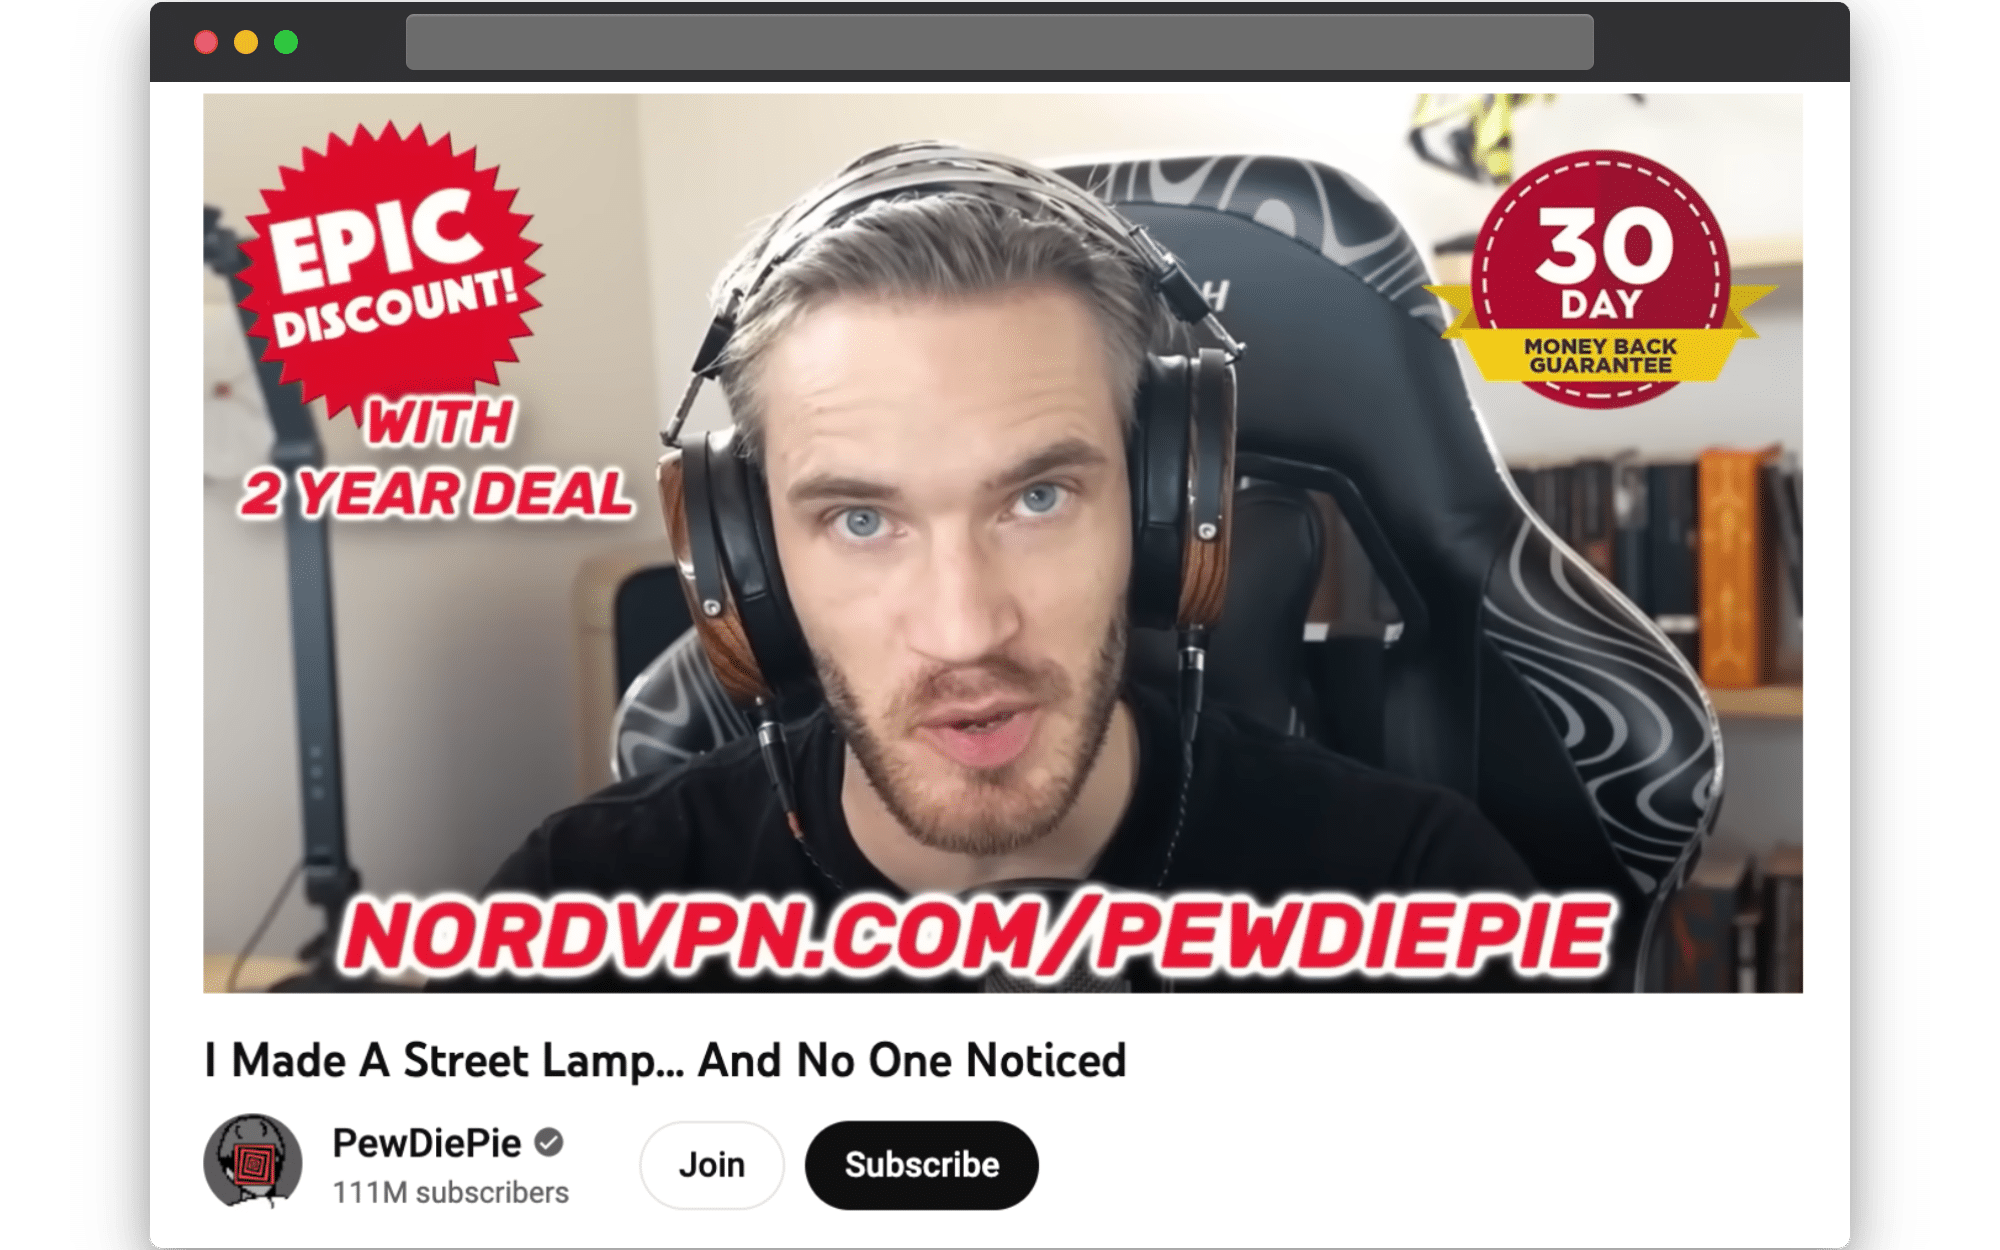 In this video, PewDiePie ends his video with a link to a product. 